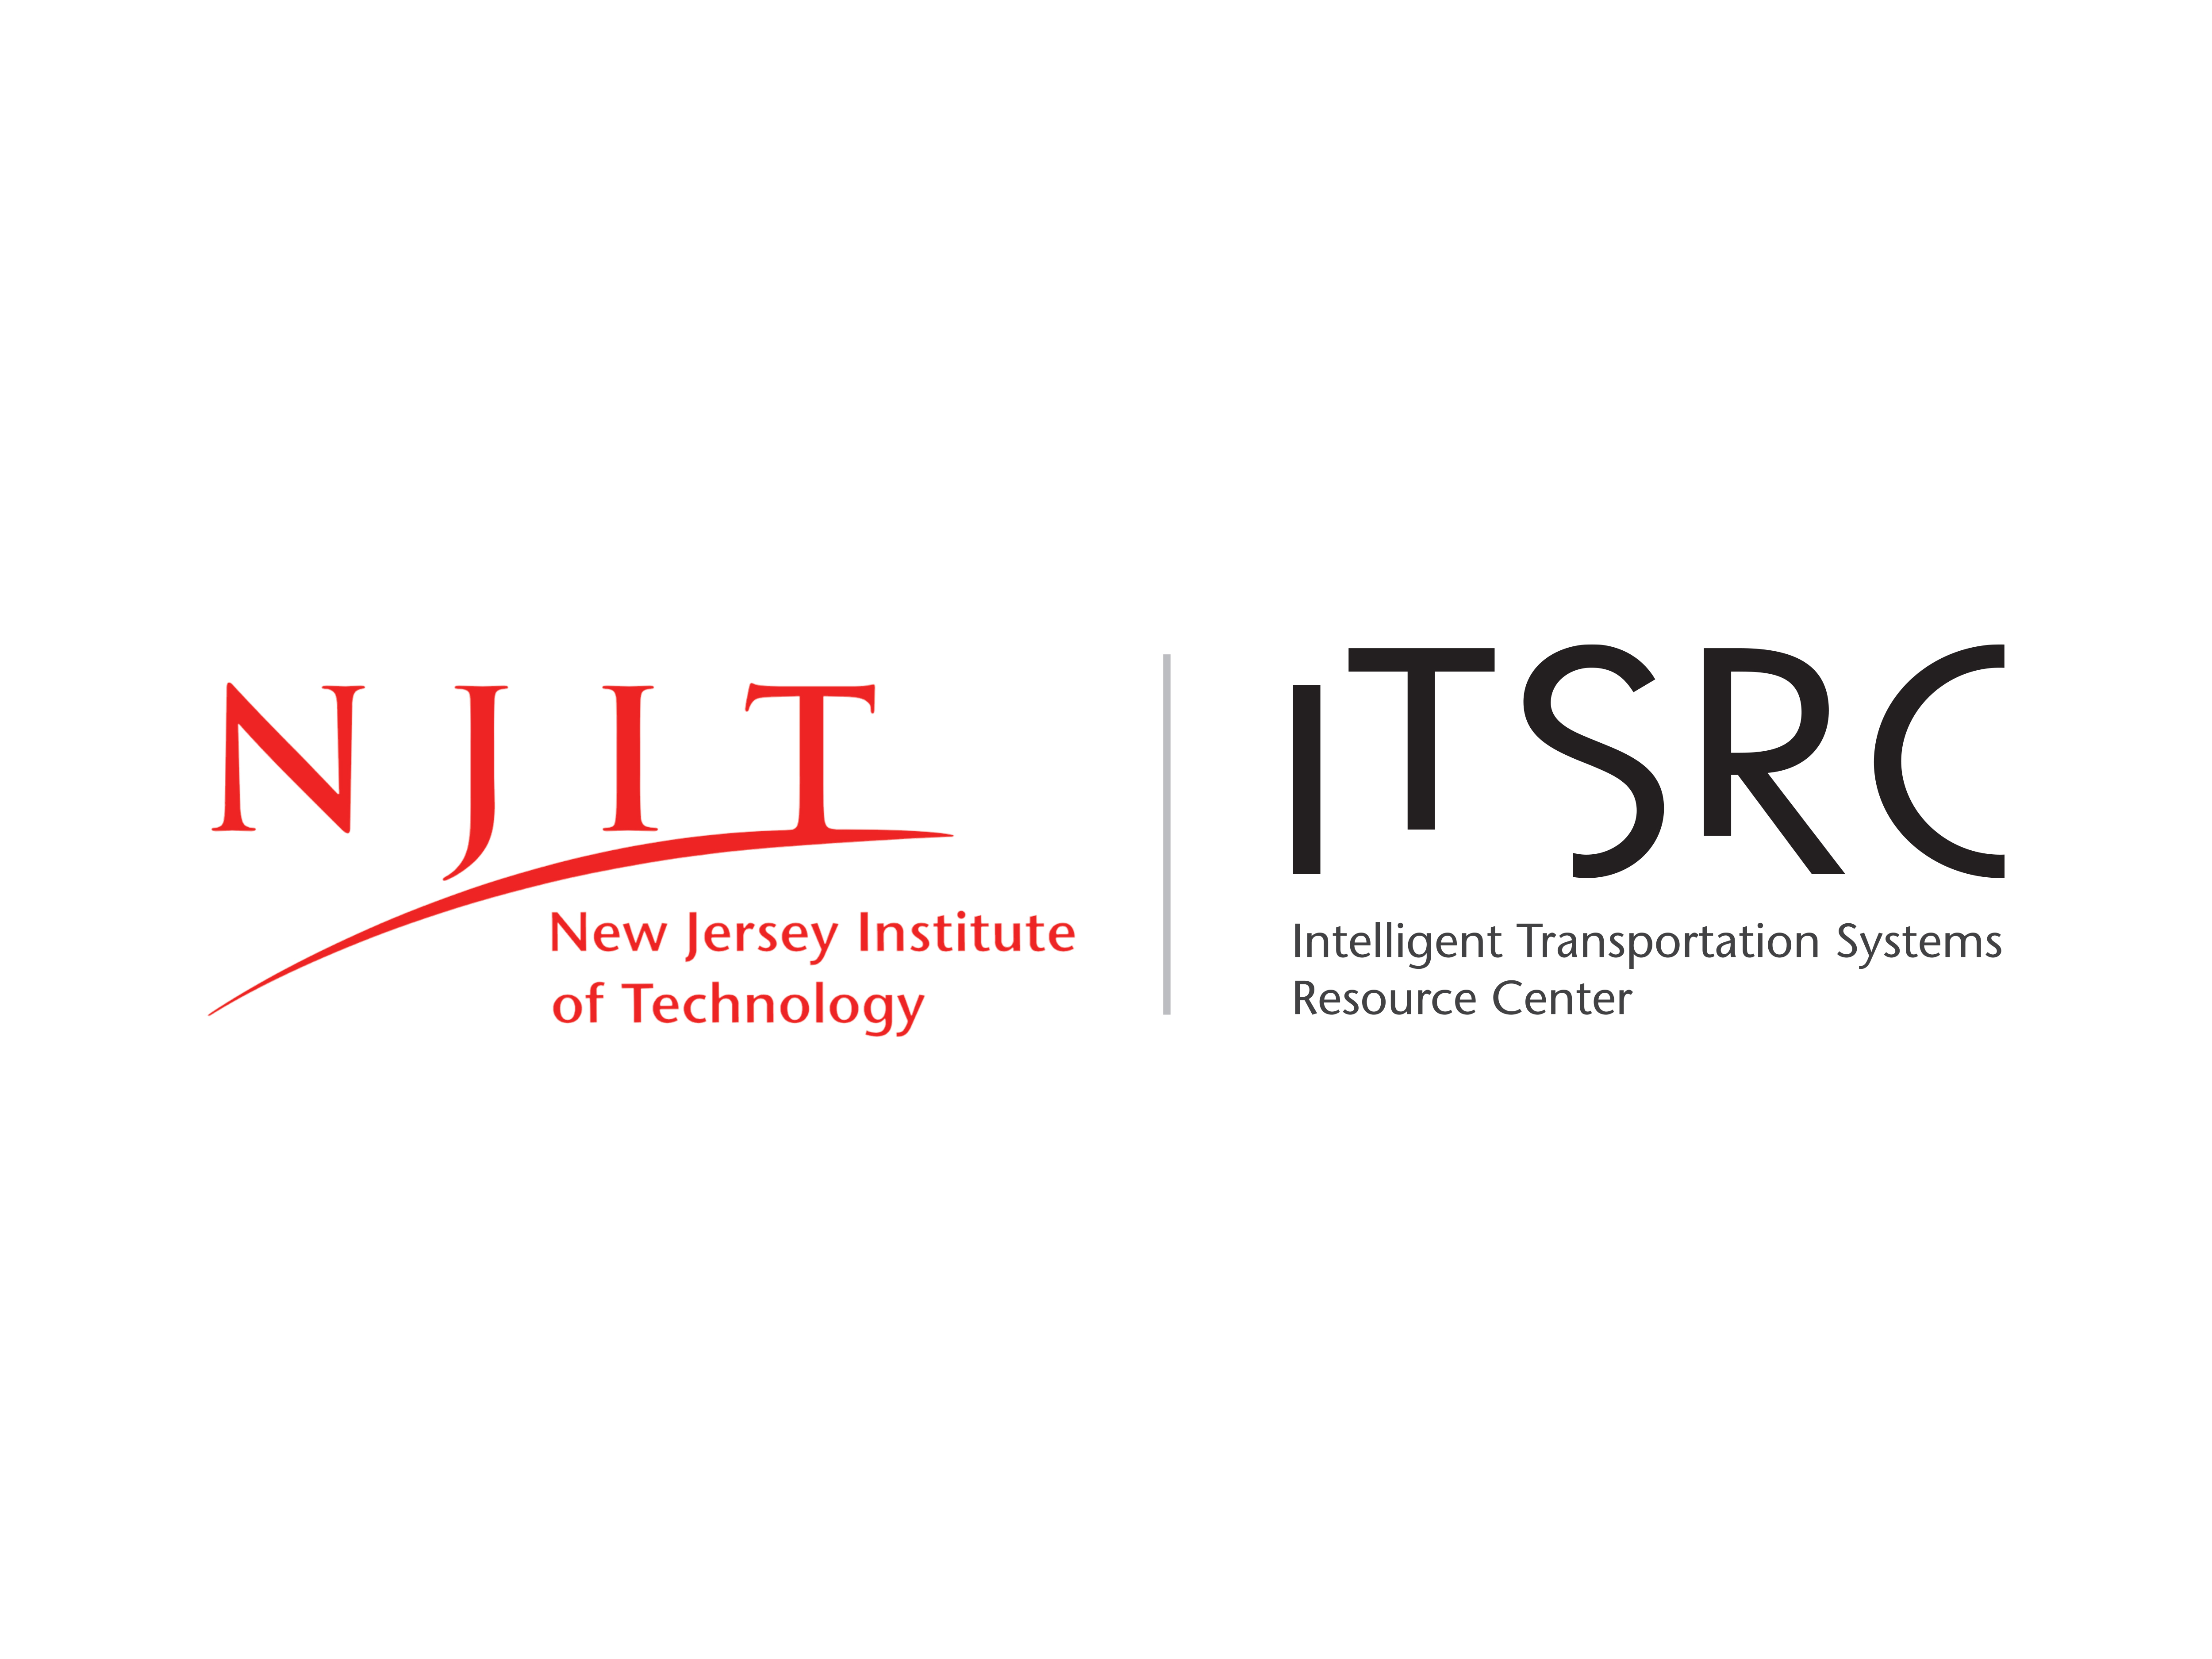 ITSRC logo accompanied with NJIT in primary red